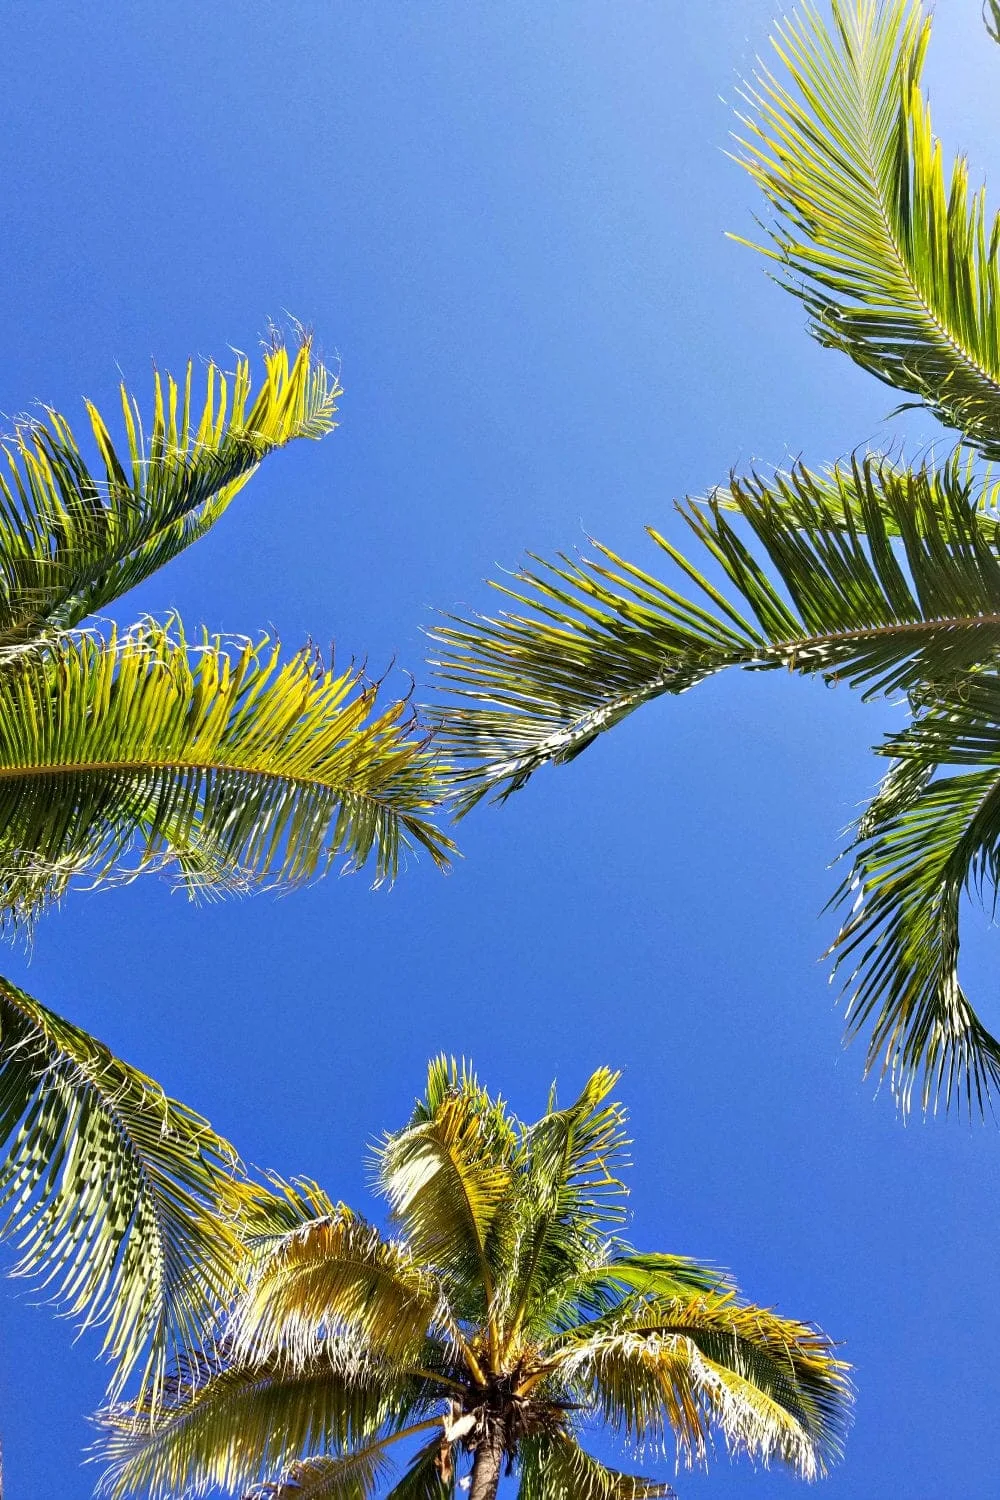 Looking up at beautiful Palm Trees